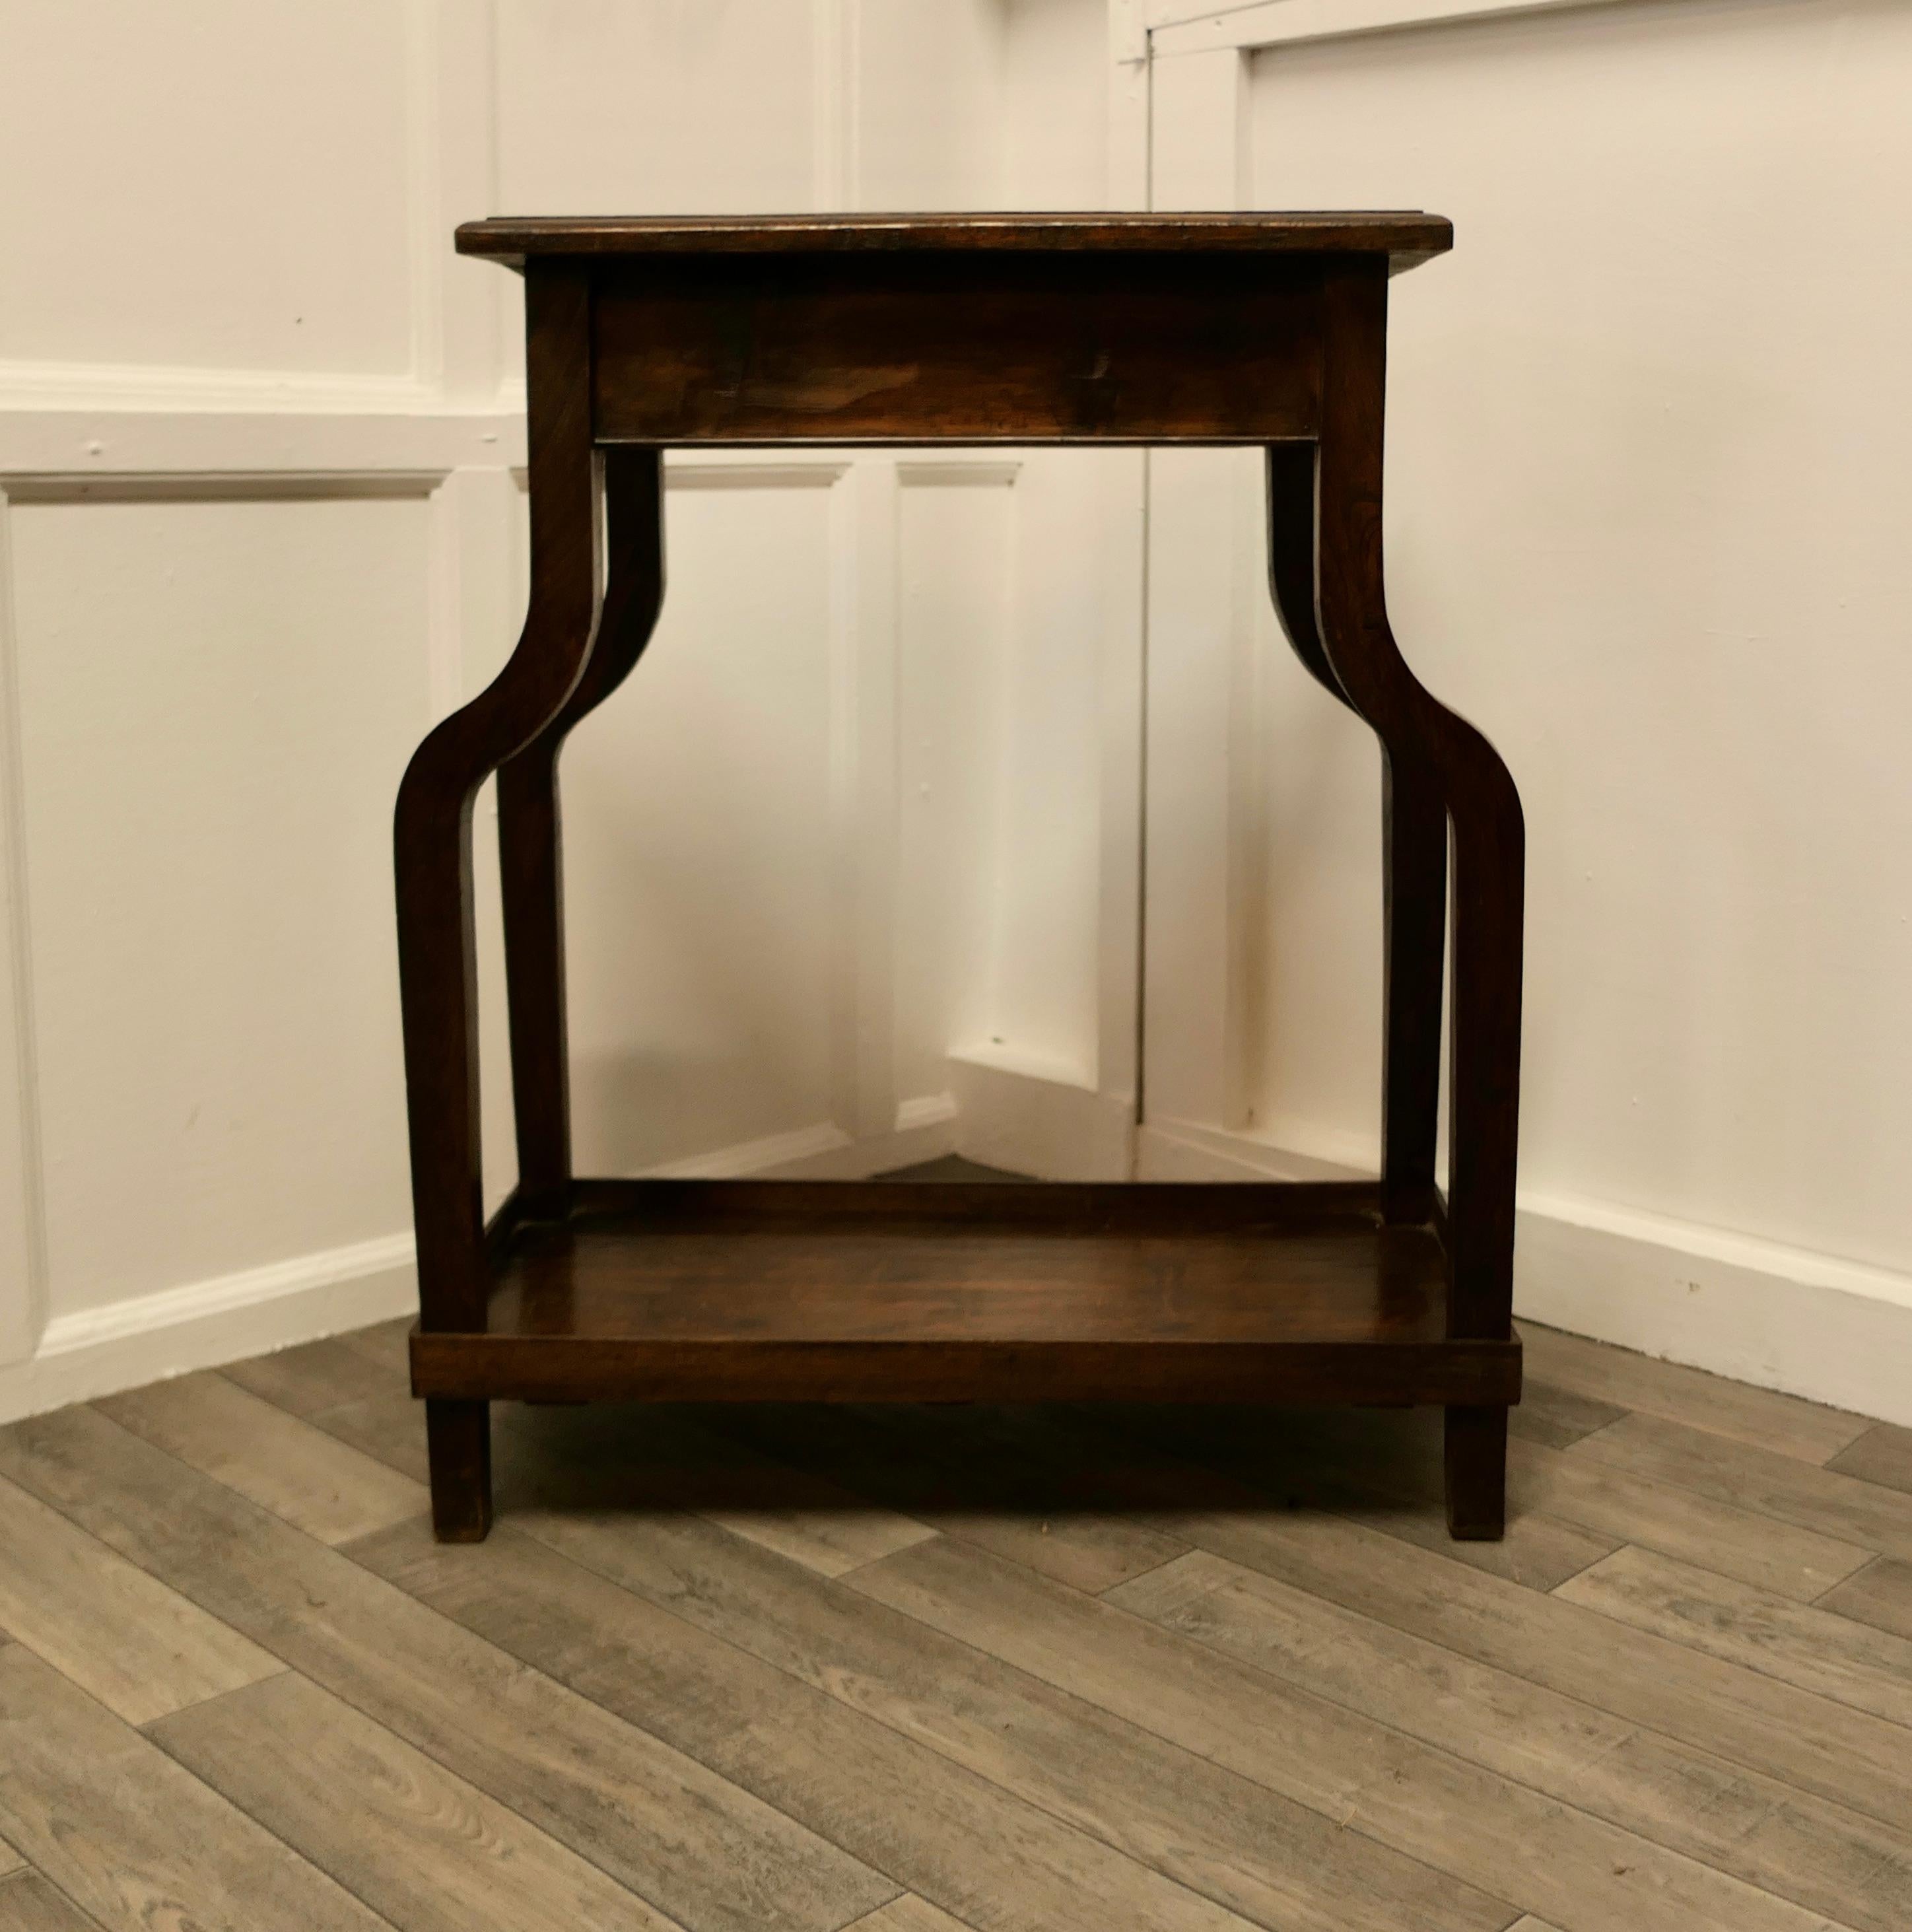 French Art Deco elm table.

A stylish table from France, the table has a rectangular top and a galleried undertier. 
The table legs splay out slightly and then stand straight.
The table is in good condition, the elm top has a good natural